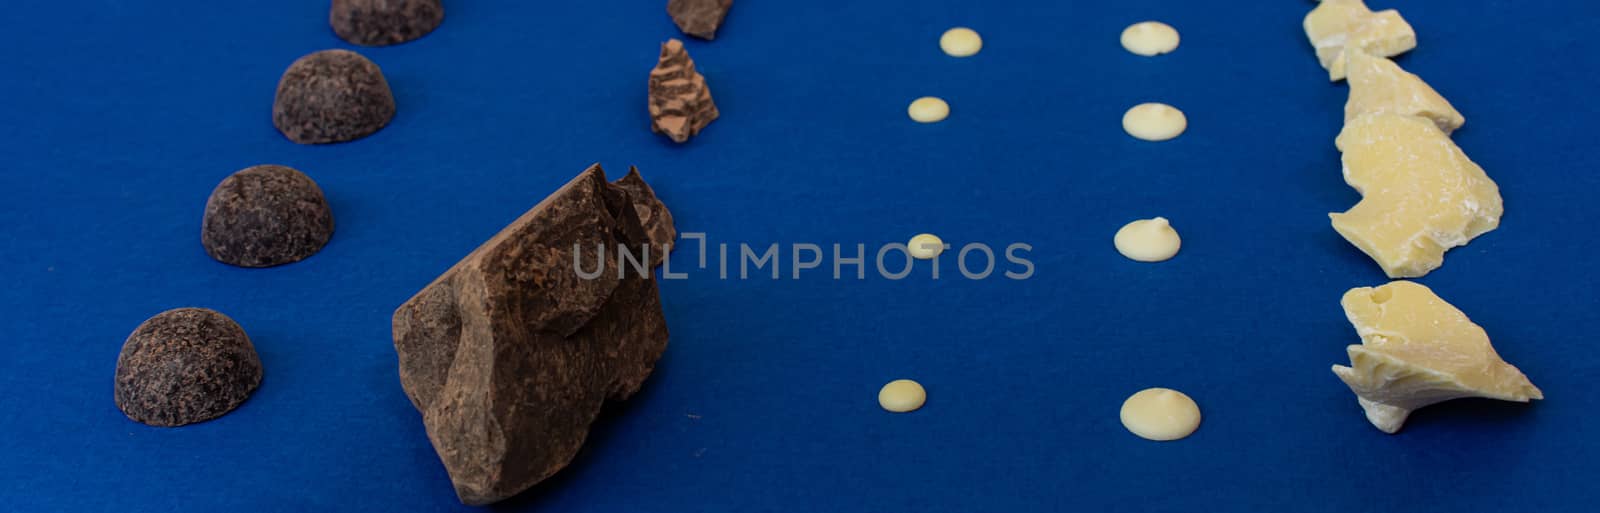 Pieces of natural dark chocolate and white chocolate on a blue background